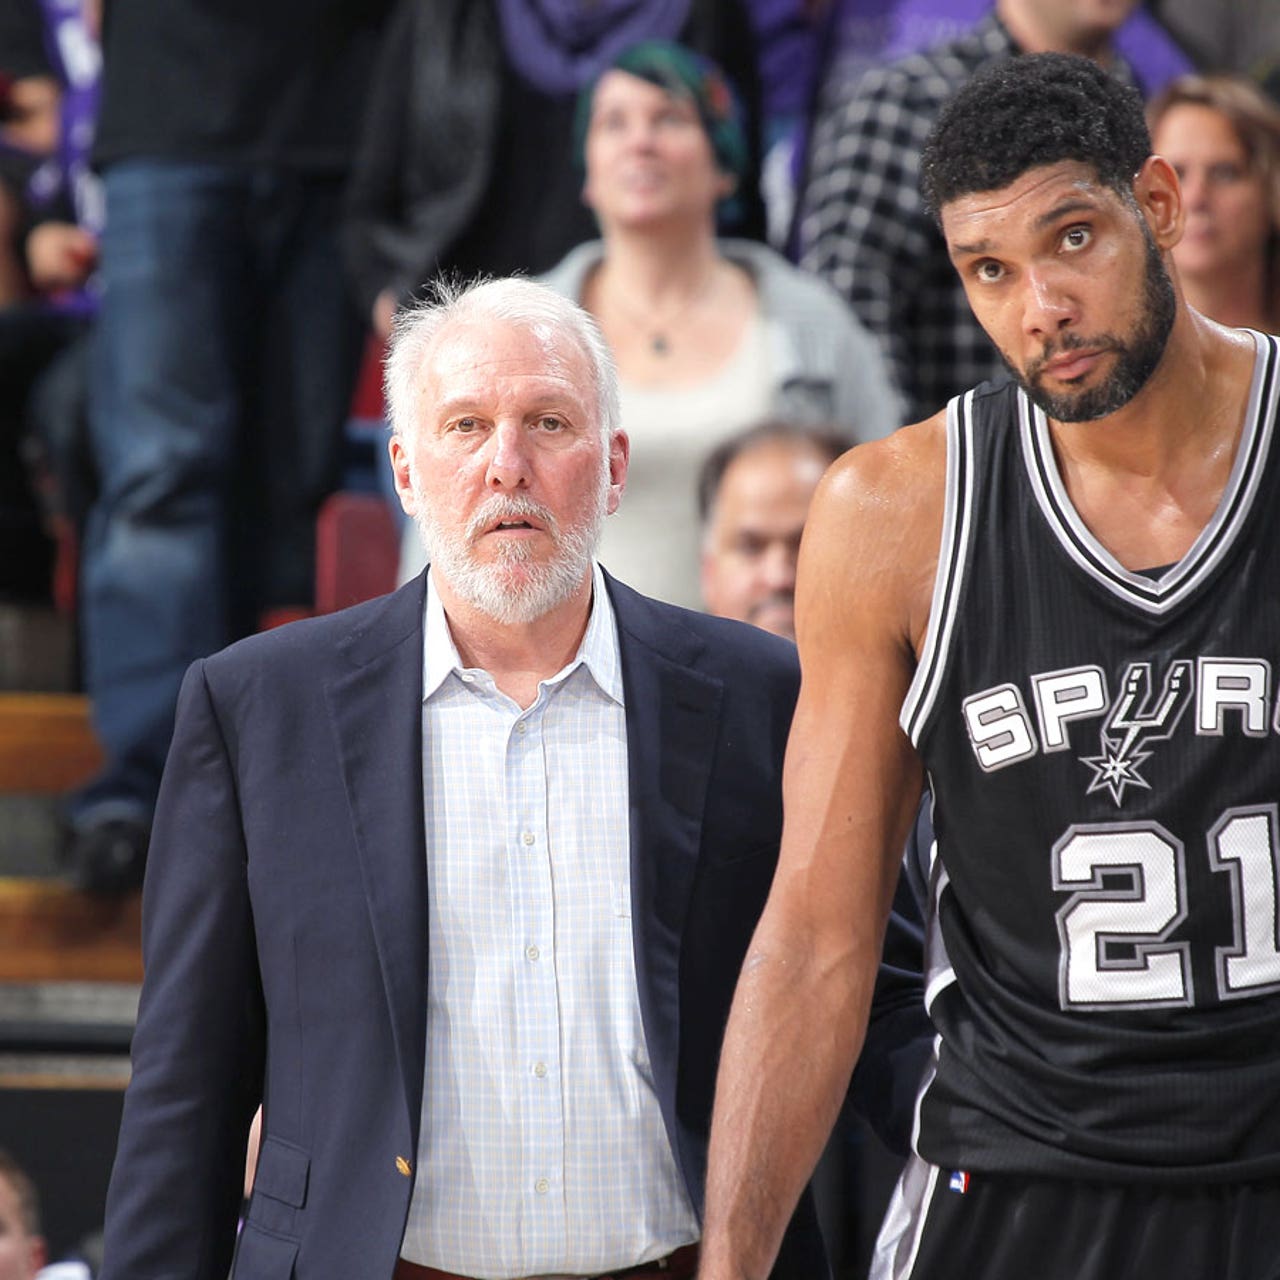 NBA -- Story time with the San Antonio Spurs' Tim Duncan and Gregg Popovich  - ESPN